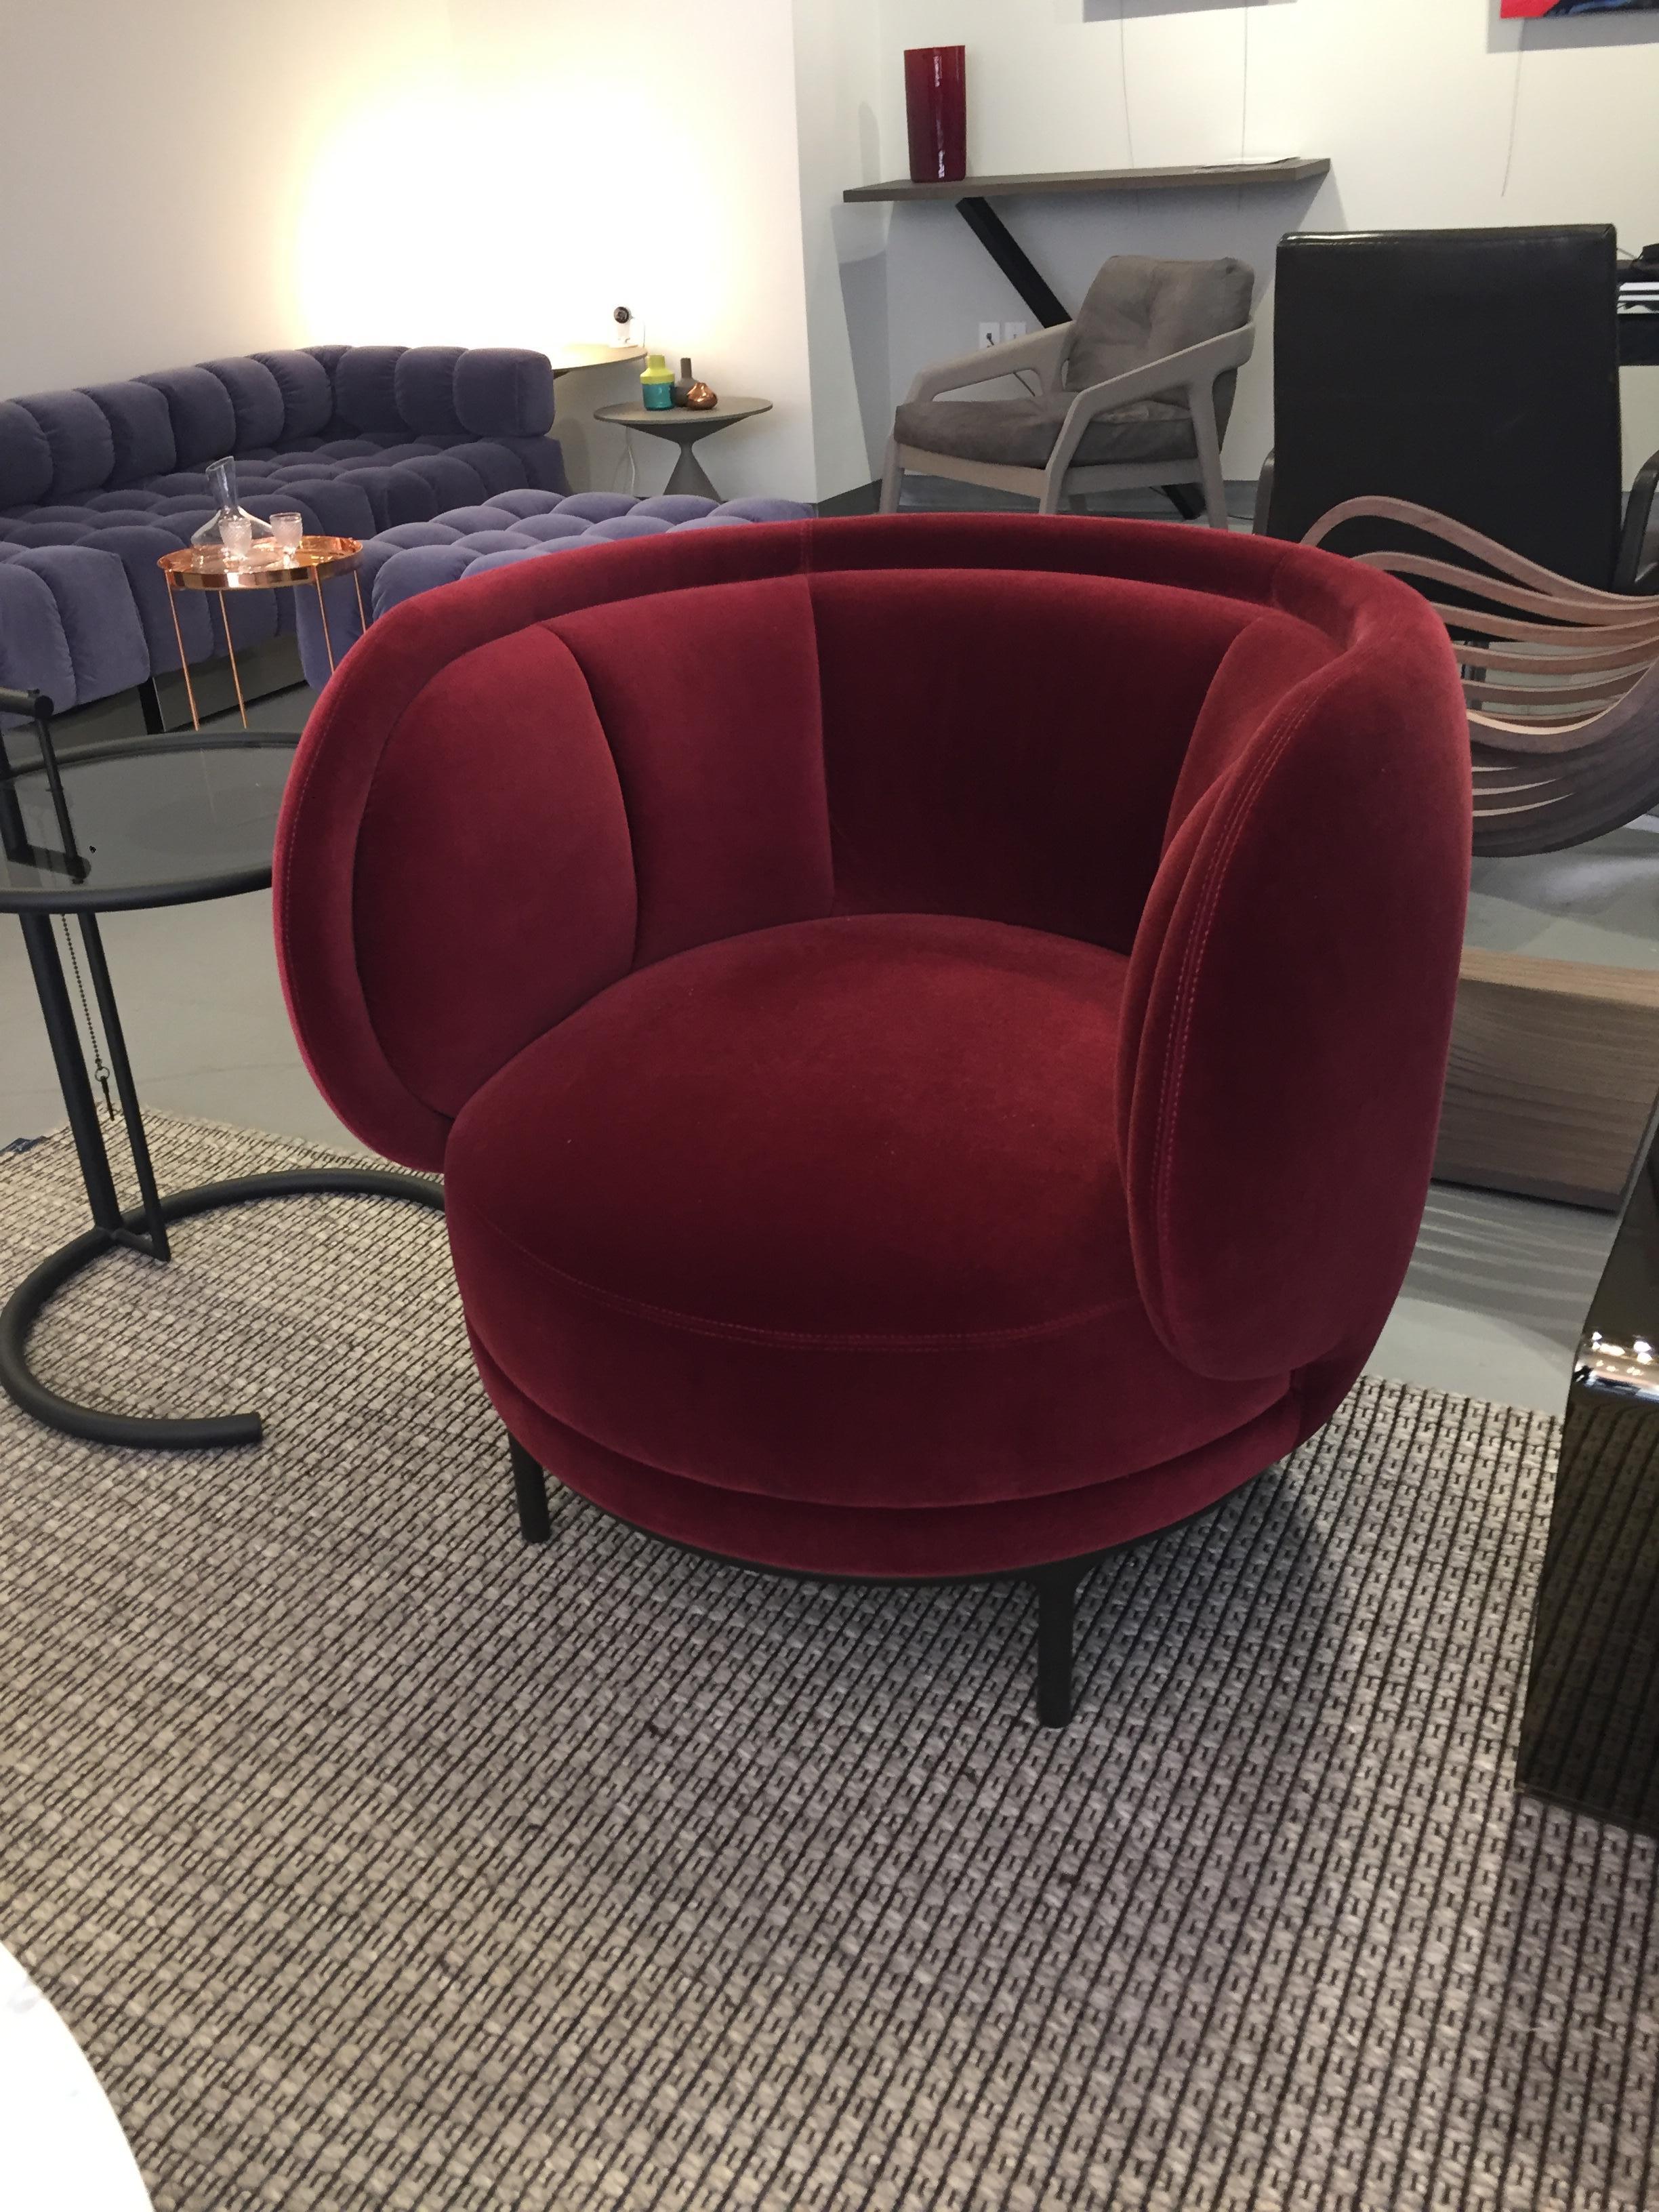 It radiates through its unusual proportions, a special charm as a solitary character. The large lounge chair (width 80, depth 82, height 75cm) with its articulating seam patterns are reminiscent of Viennese.
 